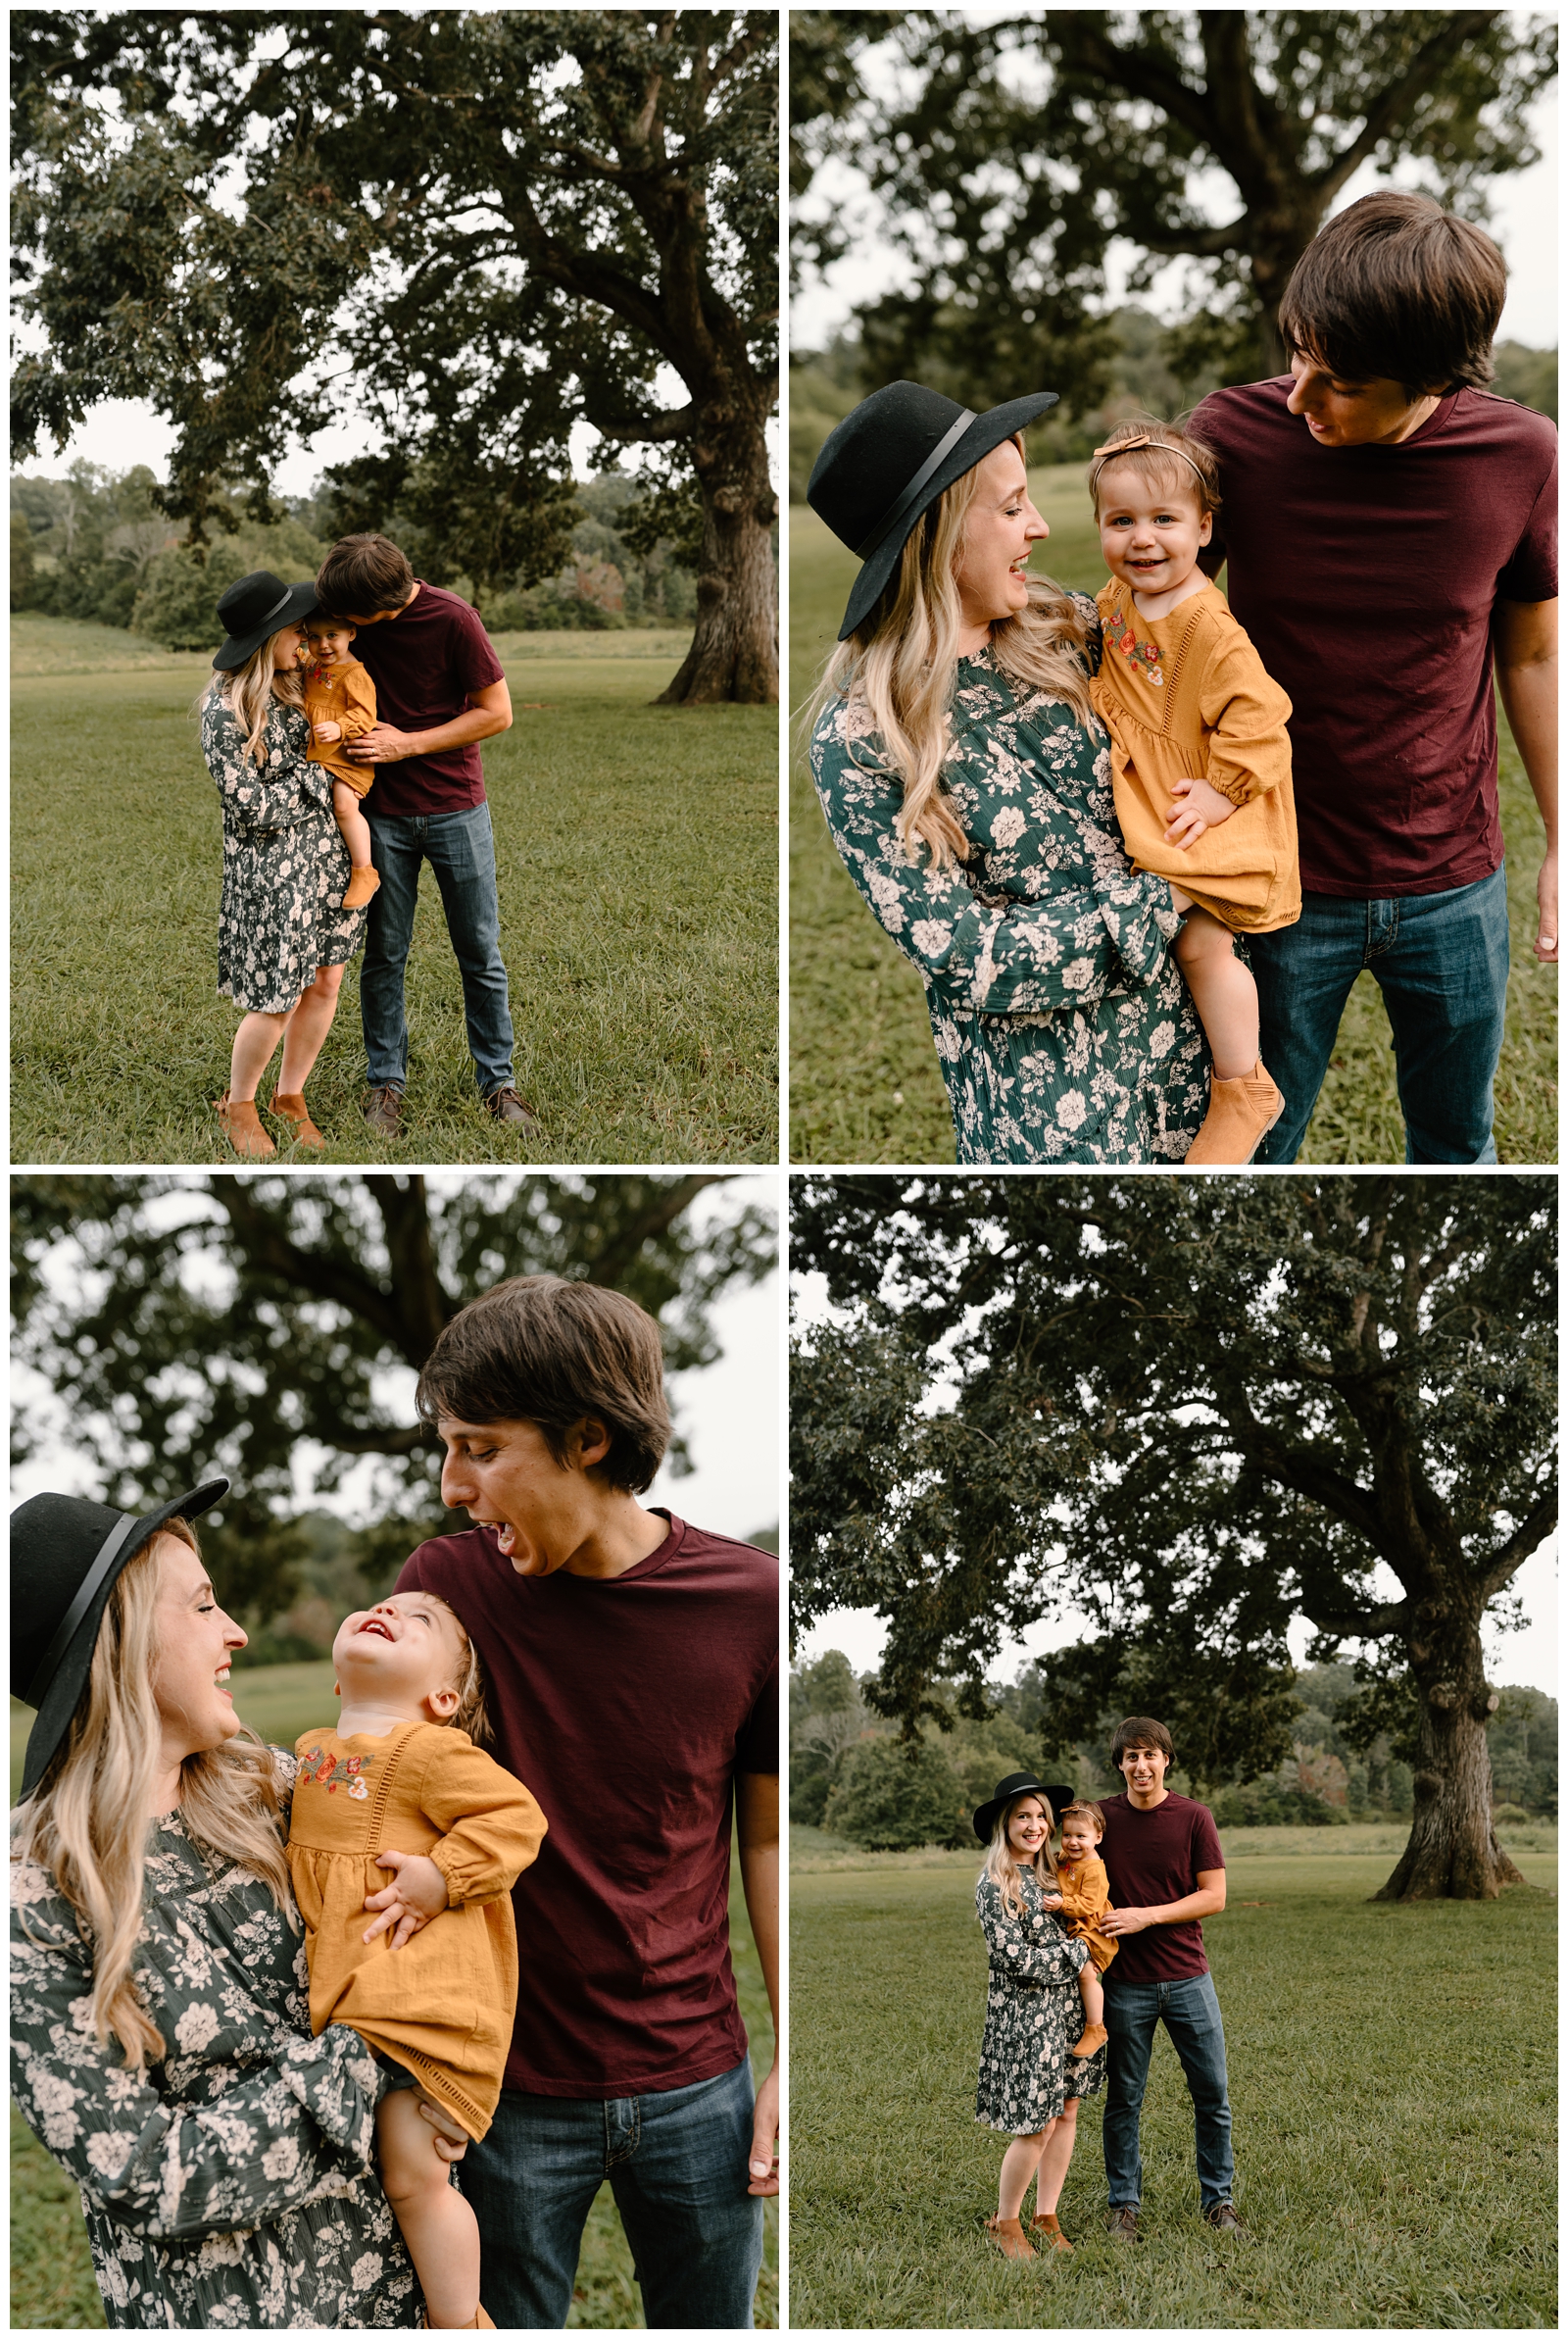 Lifestyle family session at Summerfield Farms, NC